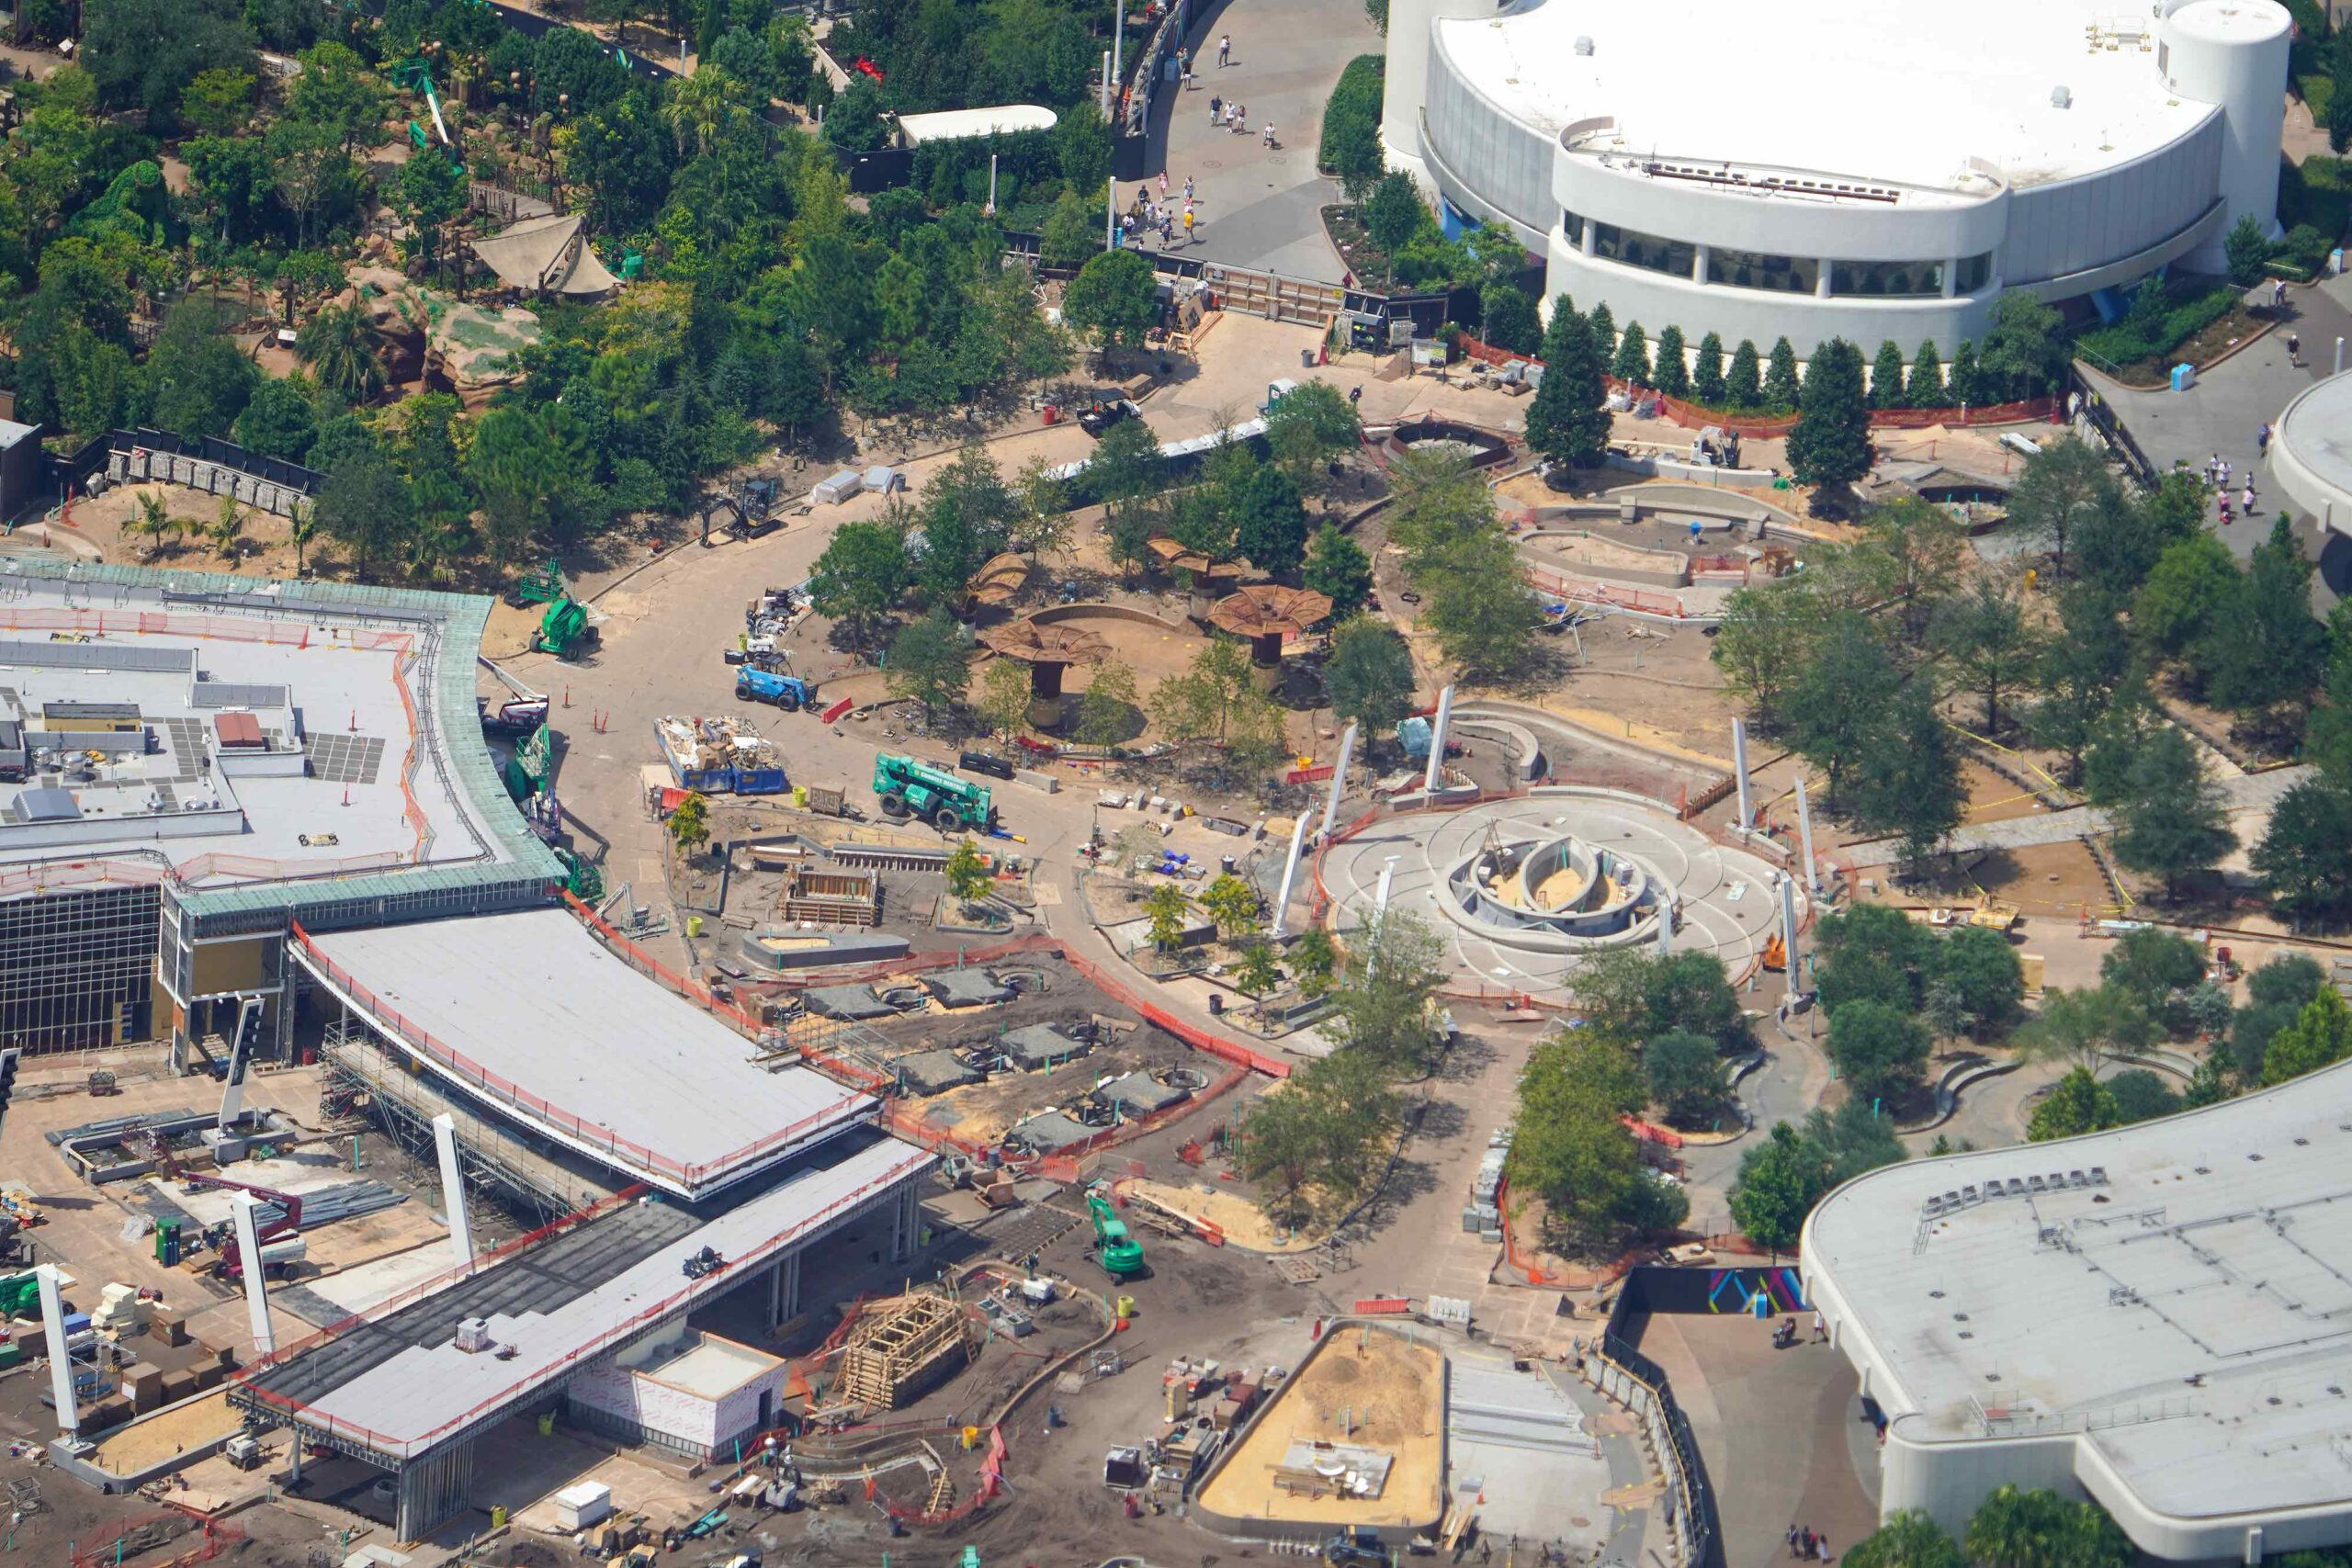 Let's Take an Aerial Look at World Celebration Construction.